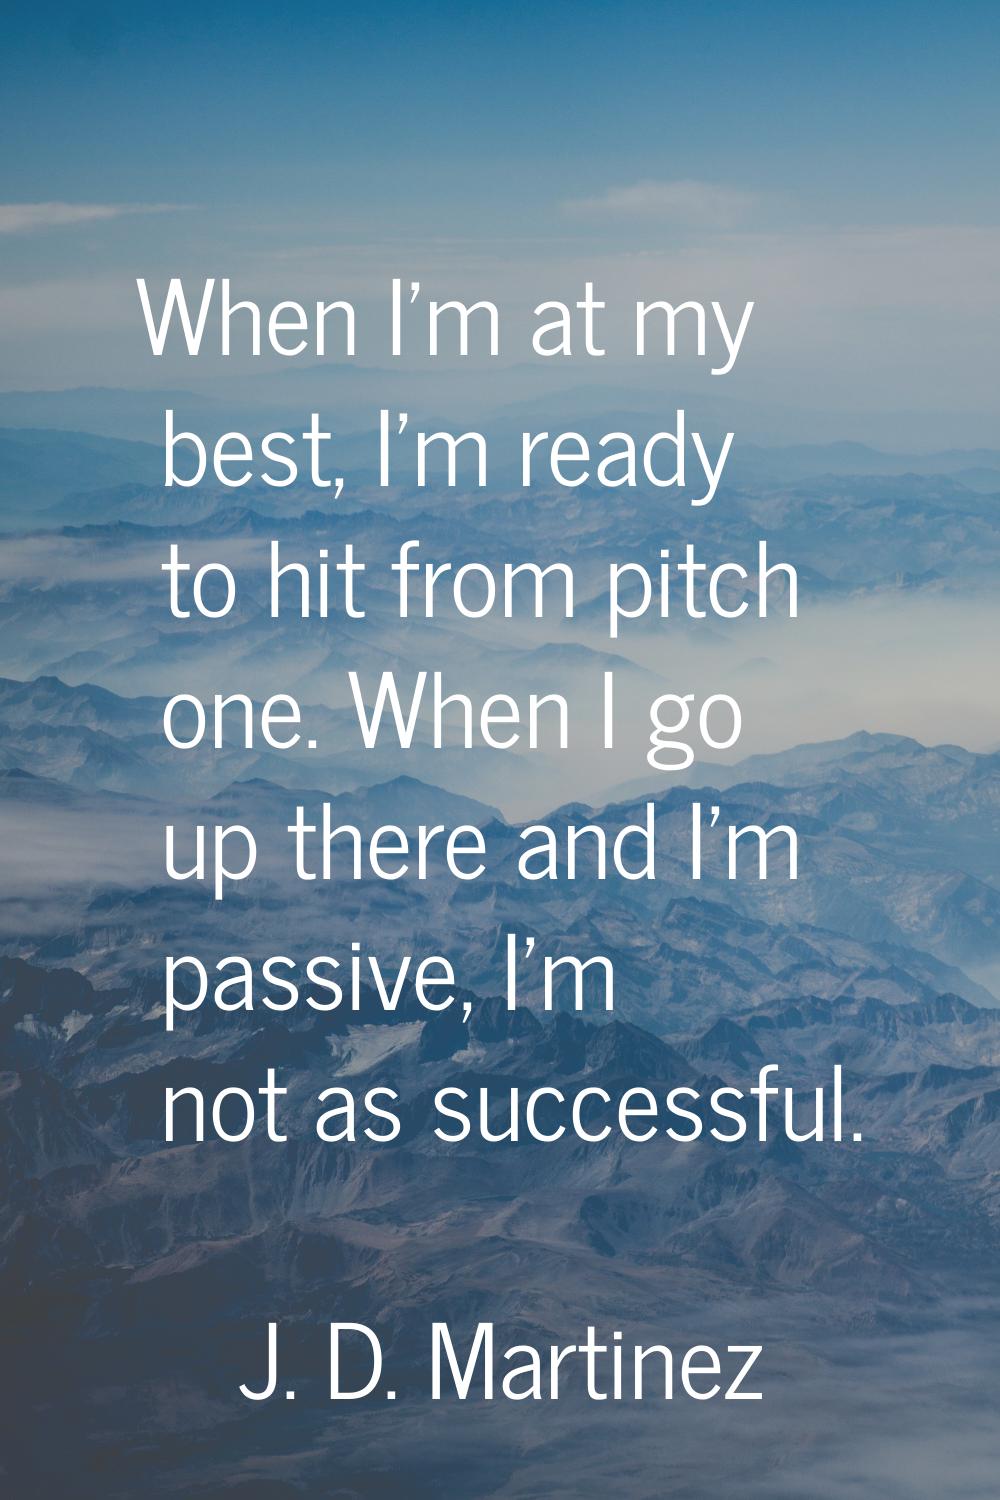 When I'm at my best, I'm ready to hit from pitch one. When I go up there and I'm passive, I'm not a